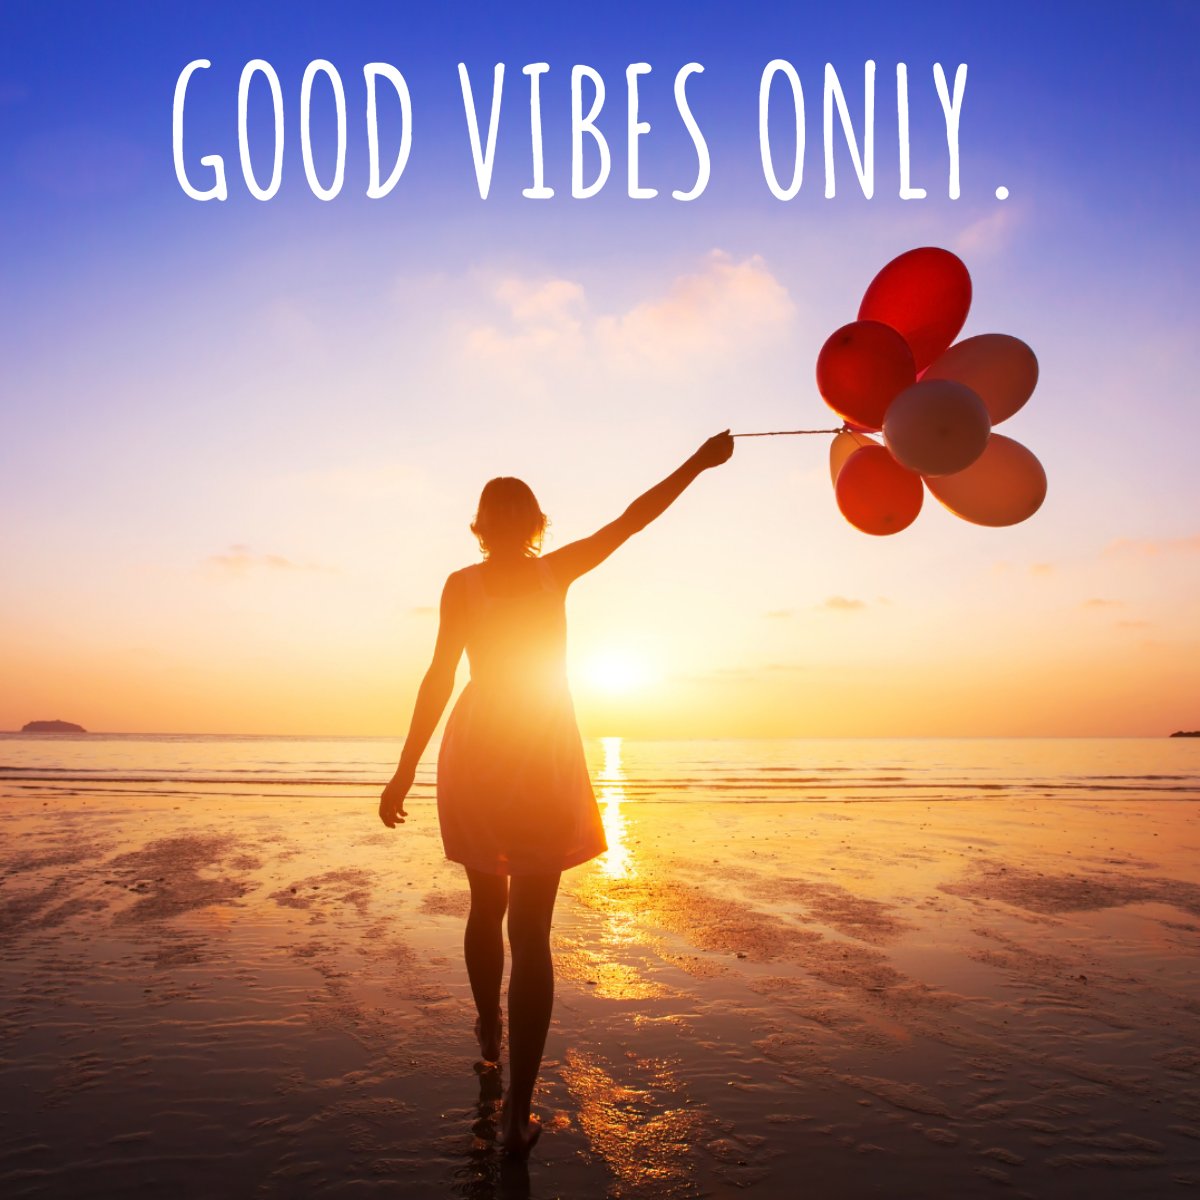 Good Vibes Only...🙆✌️

#goodvibesonly✌️ #vibes #goodvibes #positivevibes #goodquote #goodenergyonly #instagood
 #AskDomailleRealEstate #LoveWhereYouLive #RochesterMNRealEstate #ByronMNRealEstate #ByronMNRealtor #RochesterMNRealtor